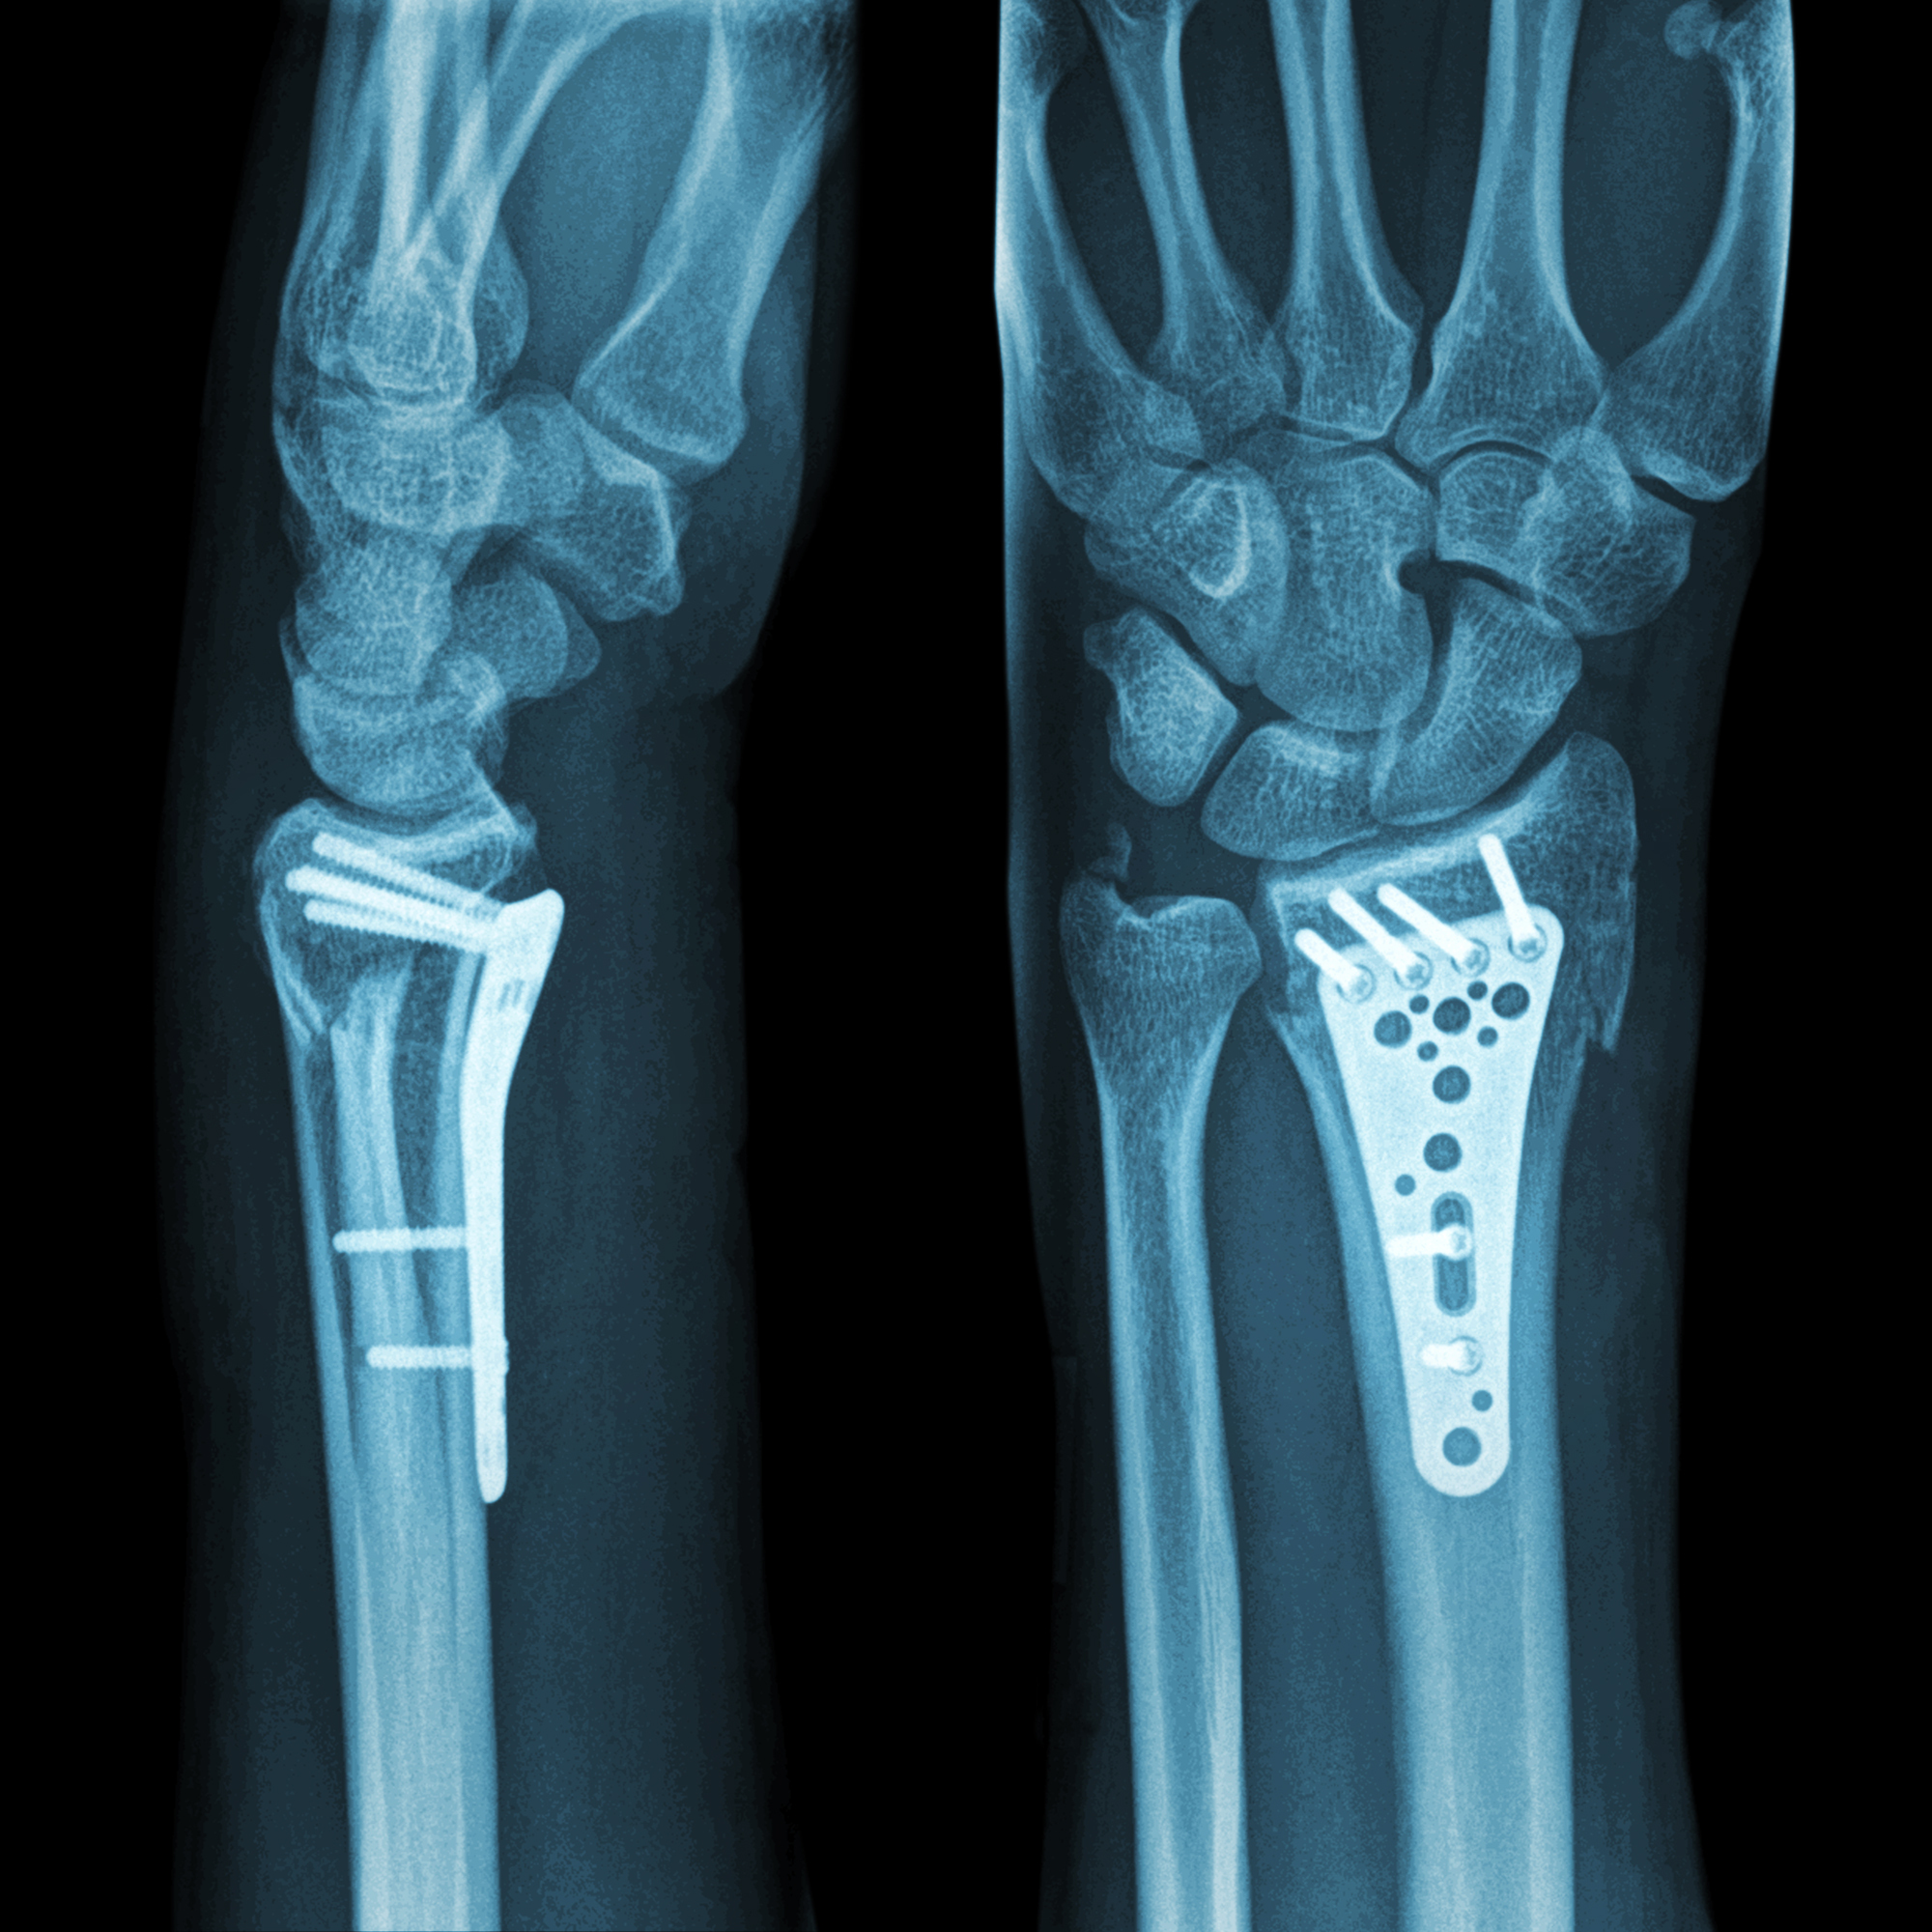 X-ray image showing an orthopaedic plate and screws at the distal radius.